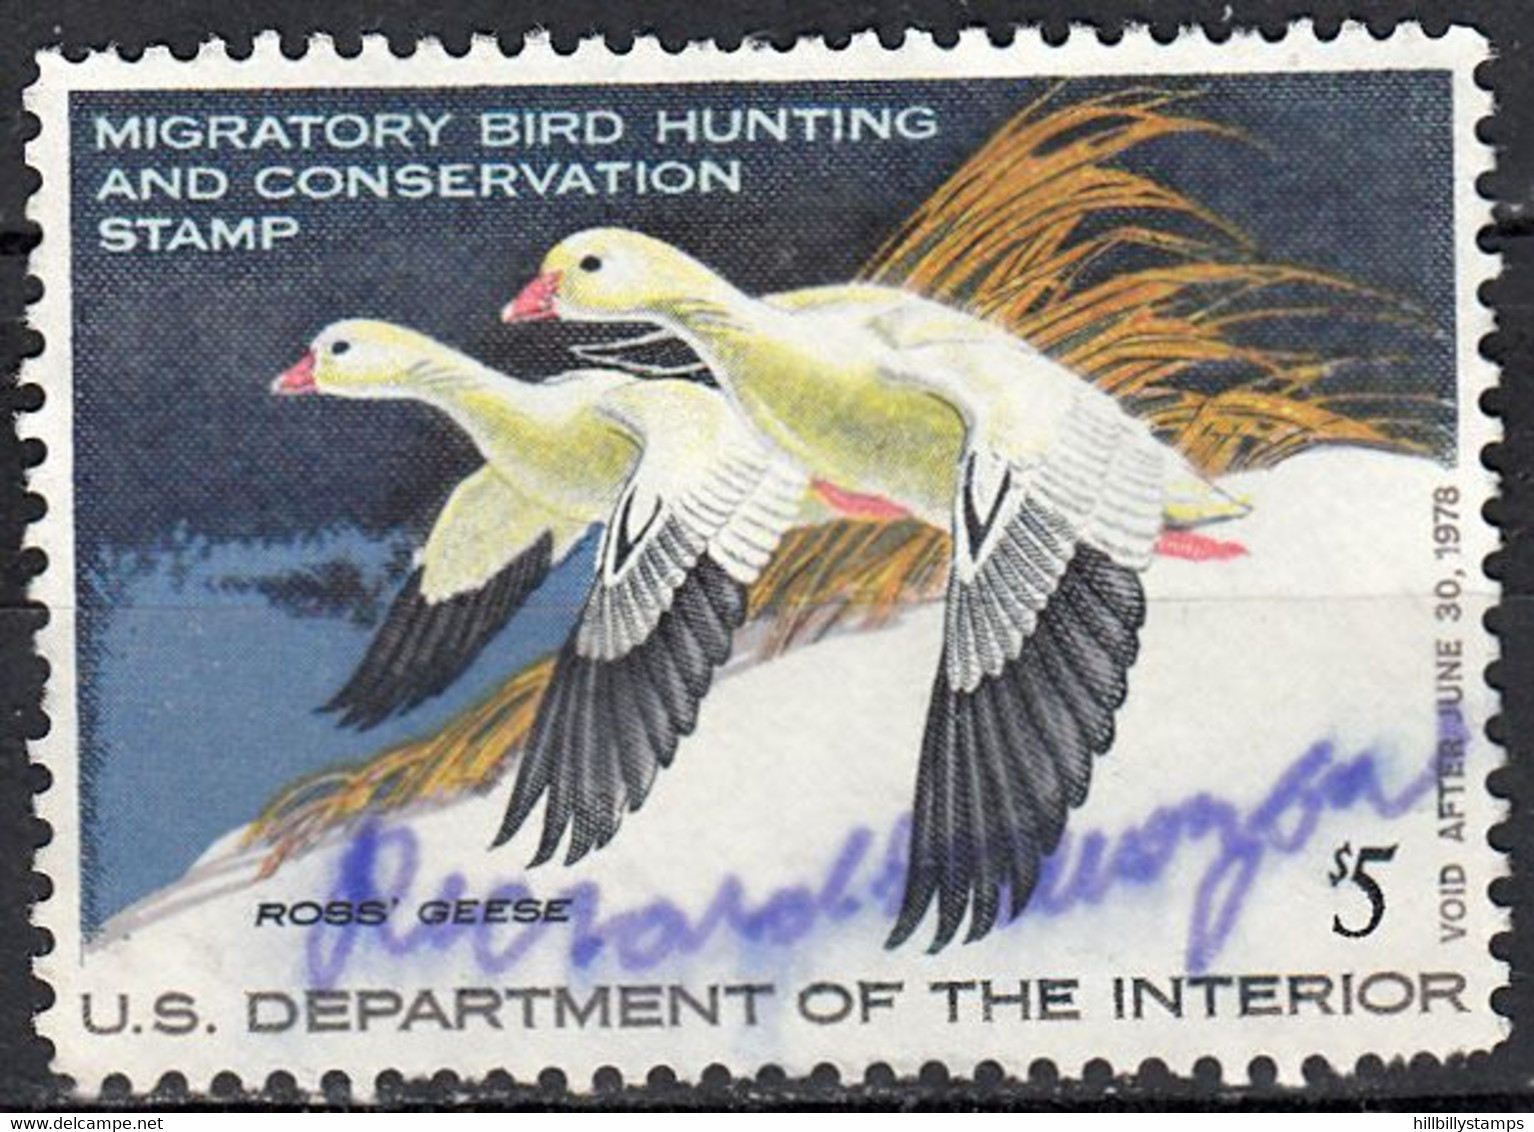 UNITED STATES  SCOTT NO RW44  USED    YEAR  1977  DISCOUNTED IN PRICE FOR SHORT PERFS L.R. CORNER - Duck Stamps